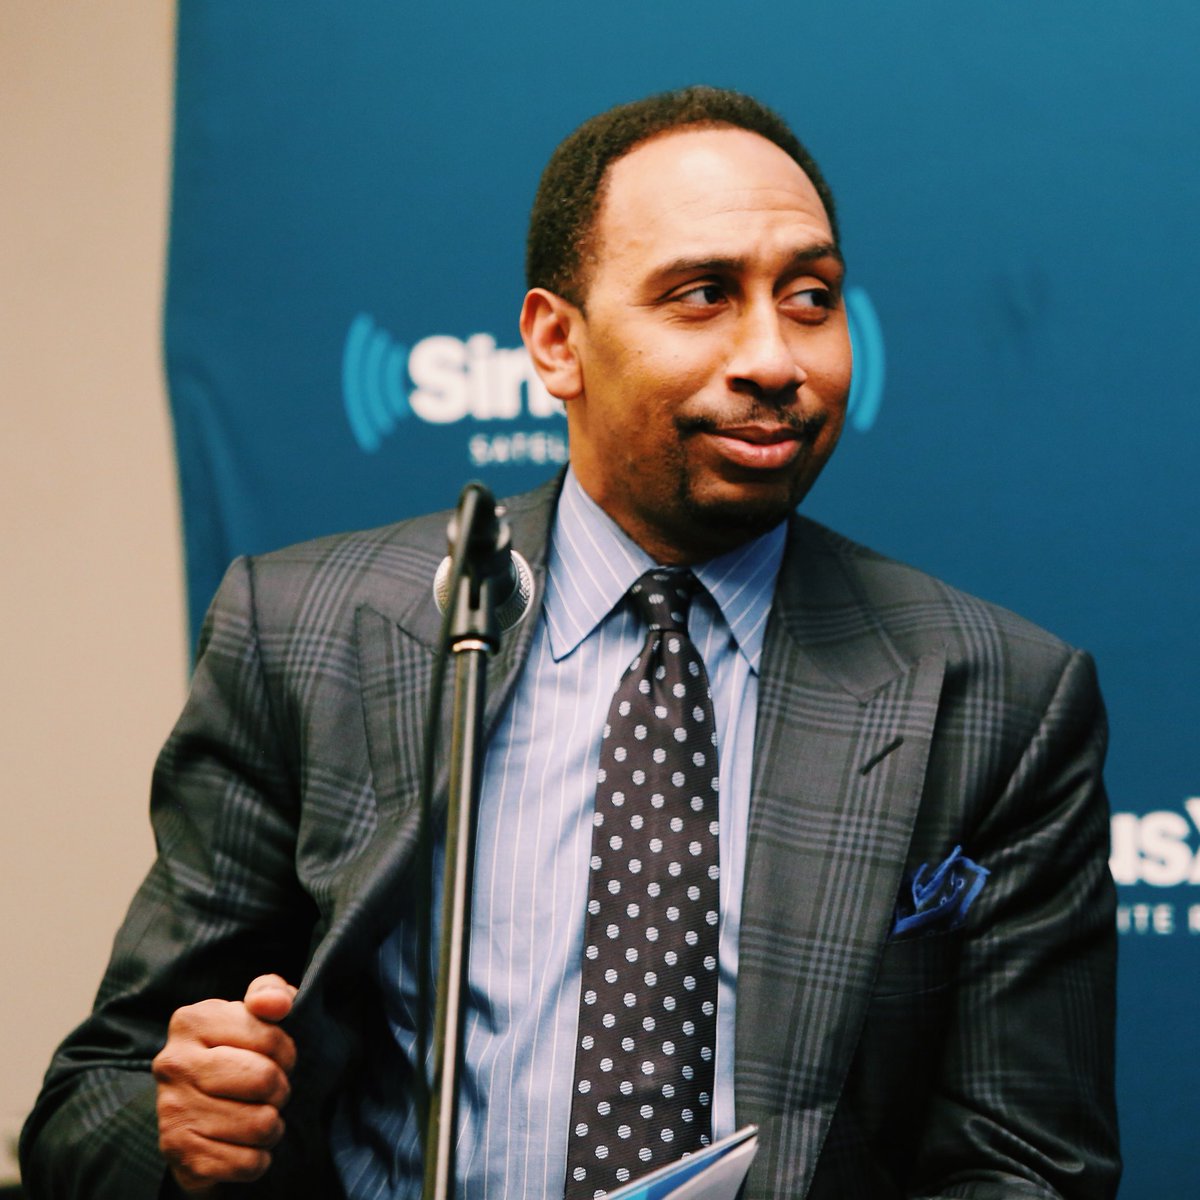 Stephen A. Smith is about to become the highest-paid talent in ESPN history. 

Out of college:

- Worked for free 7AM-12AM
- “Lived off tuna and Kool Aid”
- Pub’d 500 clips before $15K job

Now:

- $10M yearly salary
- Best entertainer in sports media